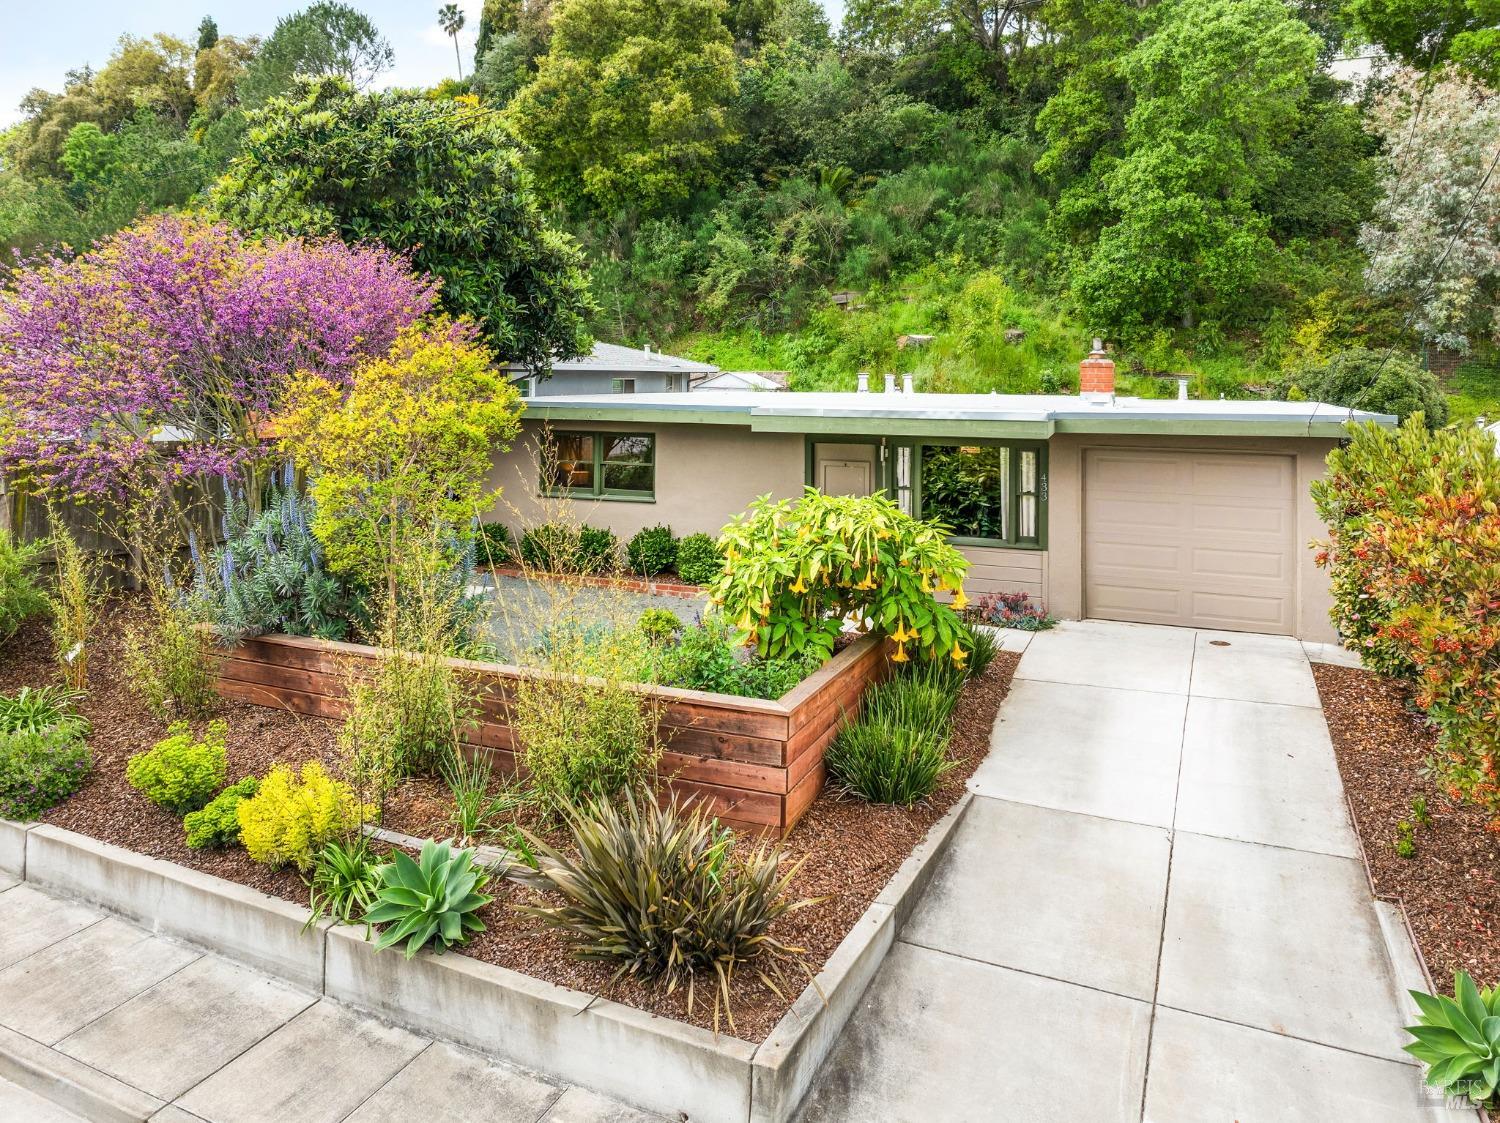 Welcome to this charming mid-century home nestled in a serene and tranquil St. Vincent's Hill neighb